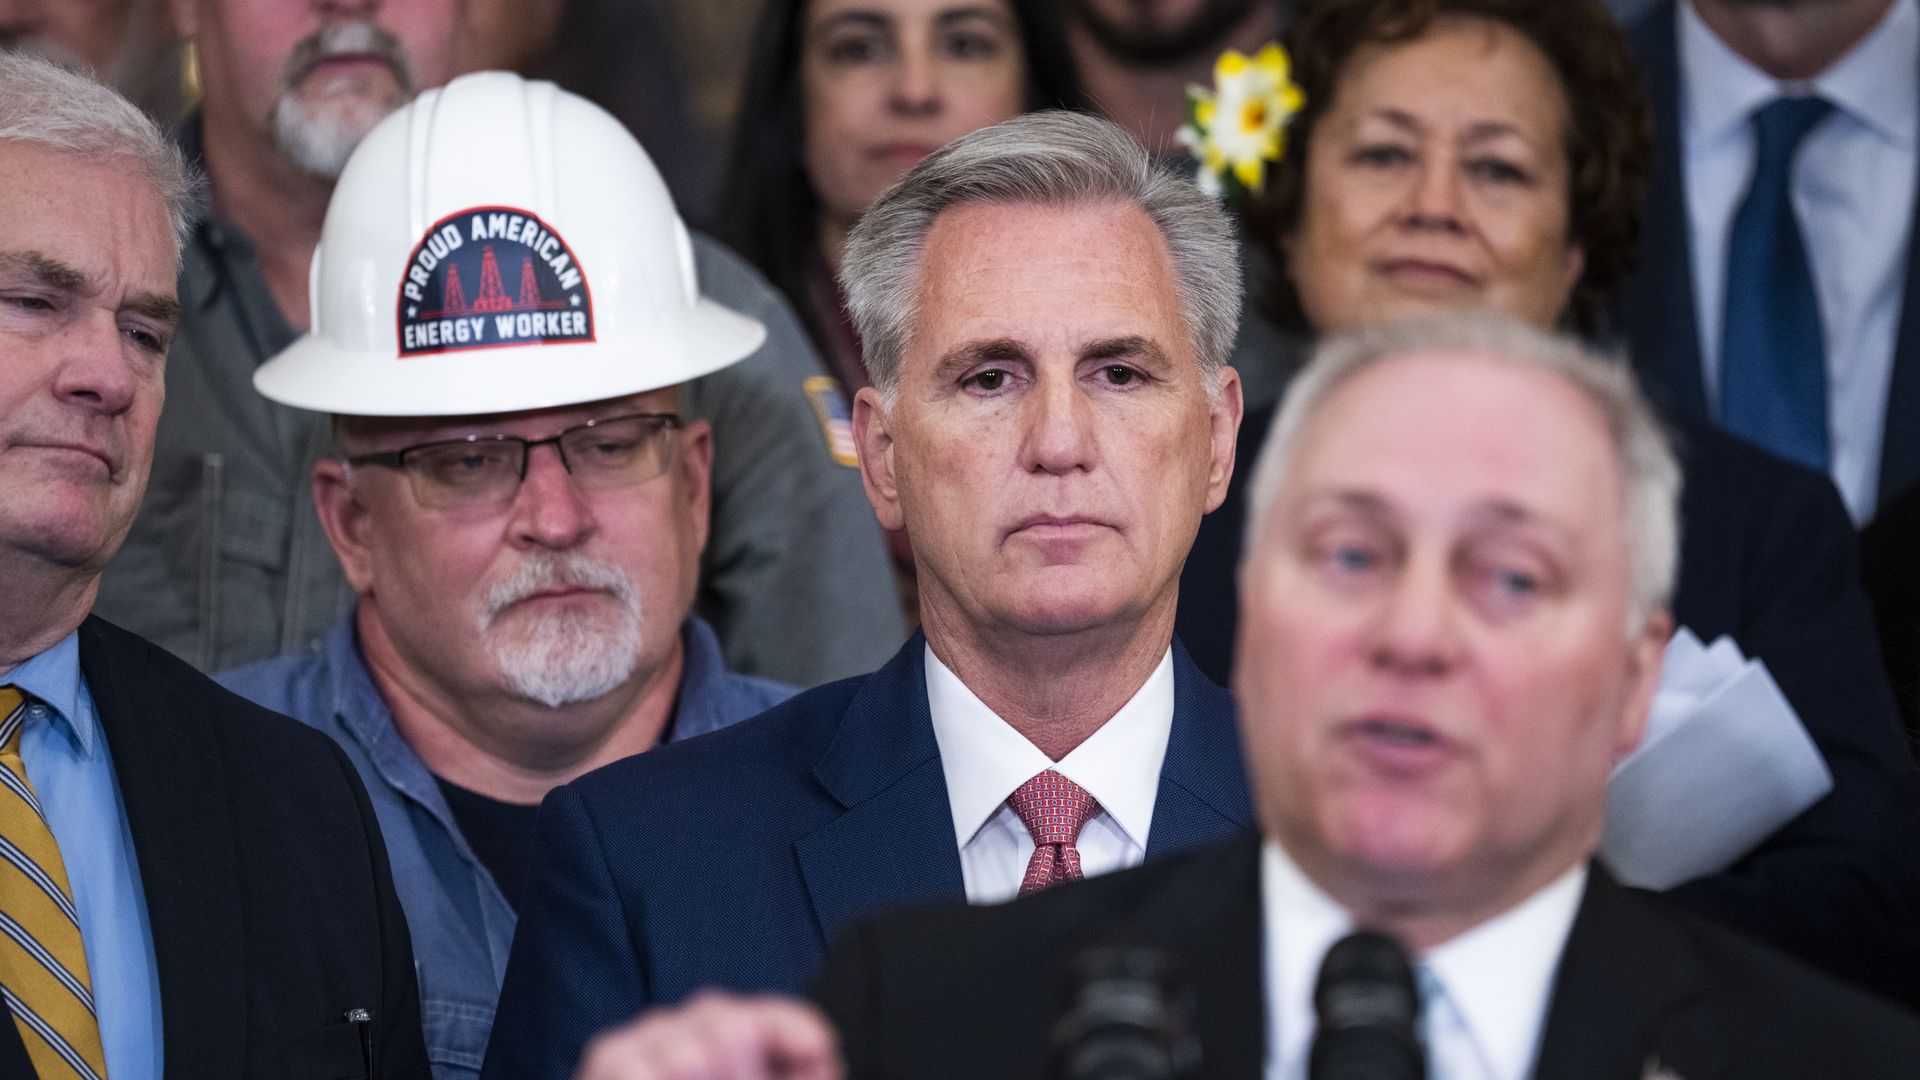 House Speaker Kevin McCarthy, wearing a blue suit, white shirt and pink tie, looks on as Majority Leader Steve Scalise speaks at a press conference.